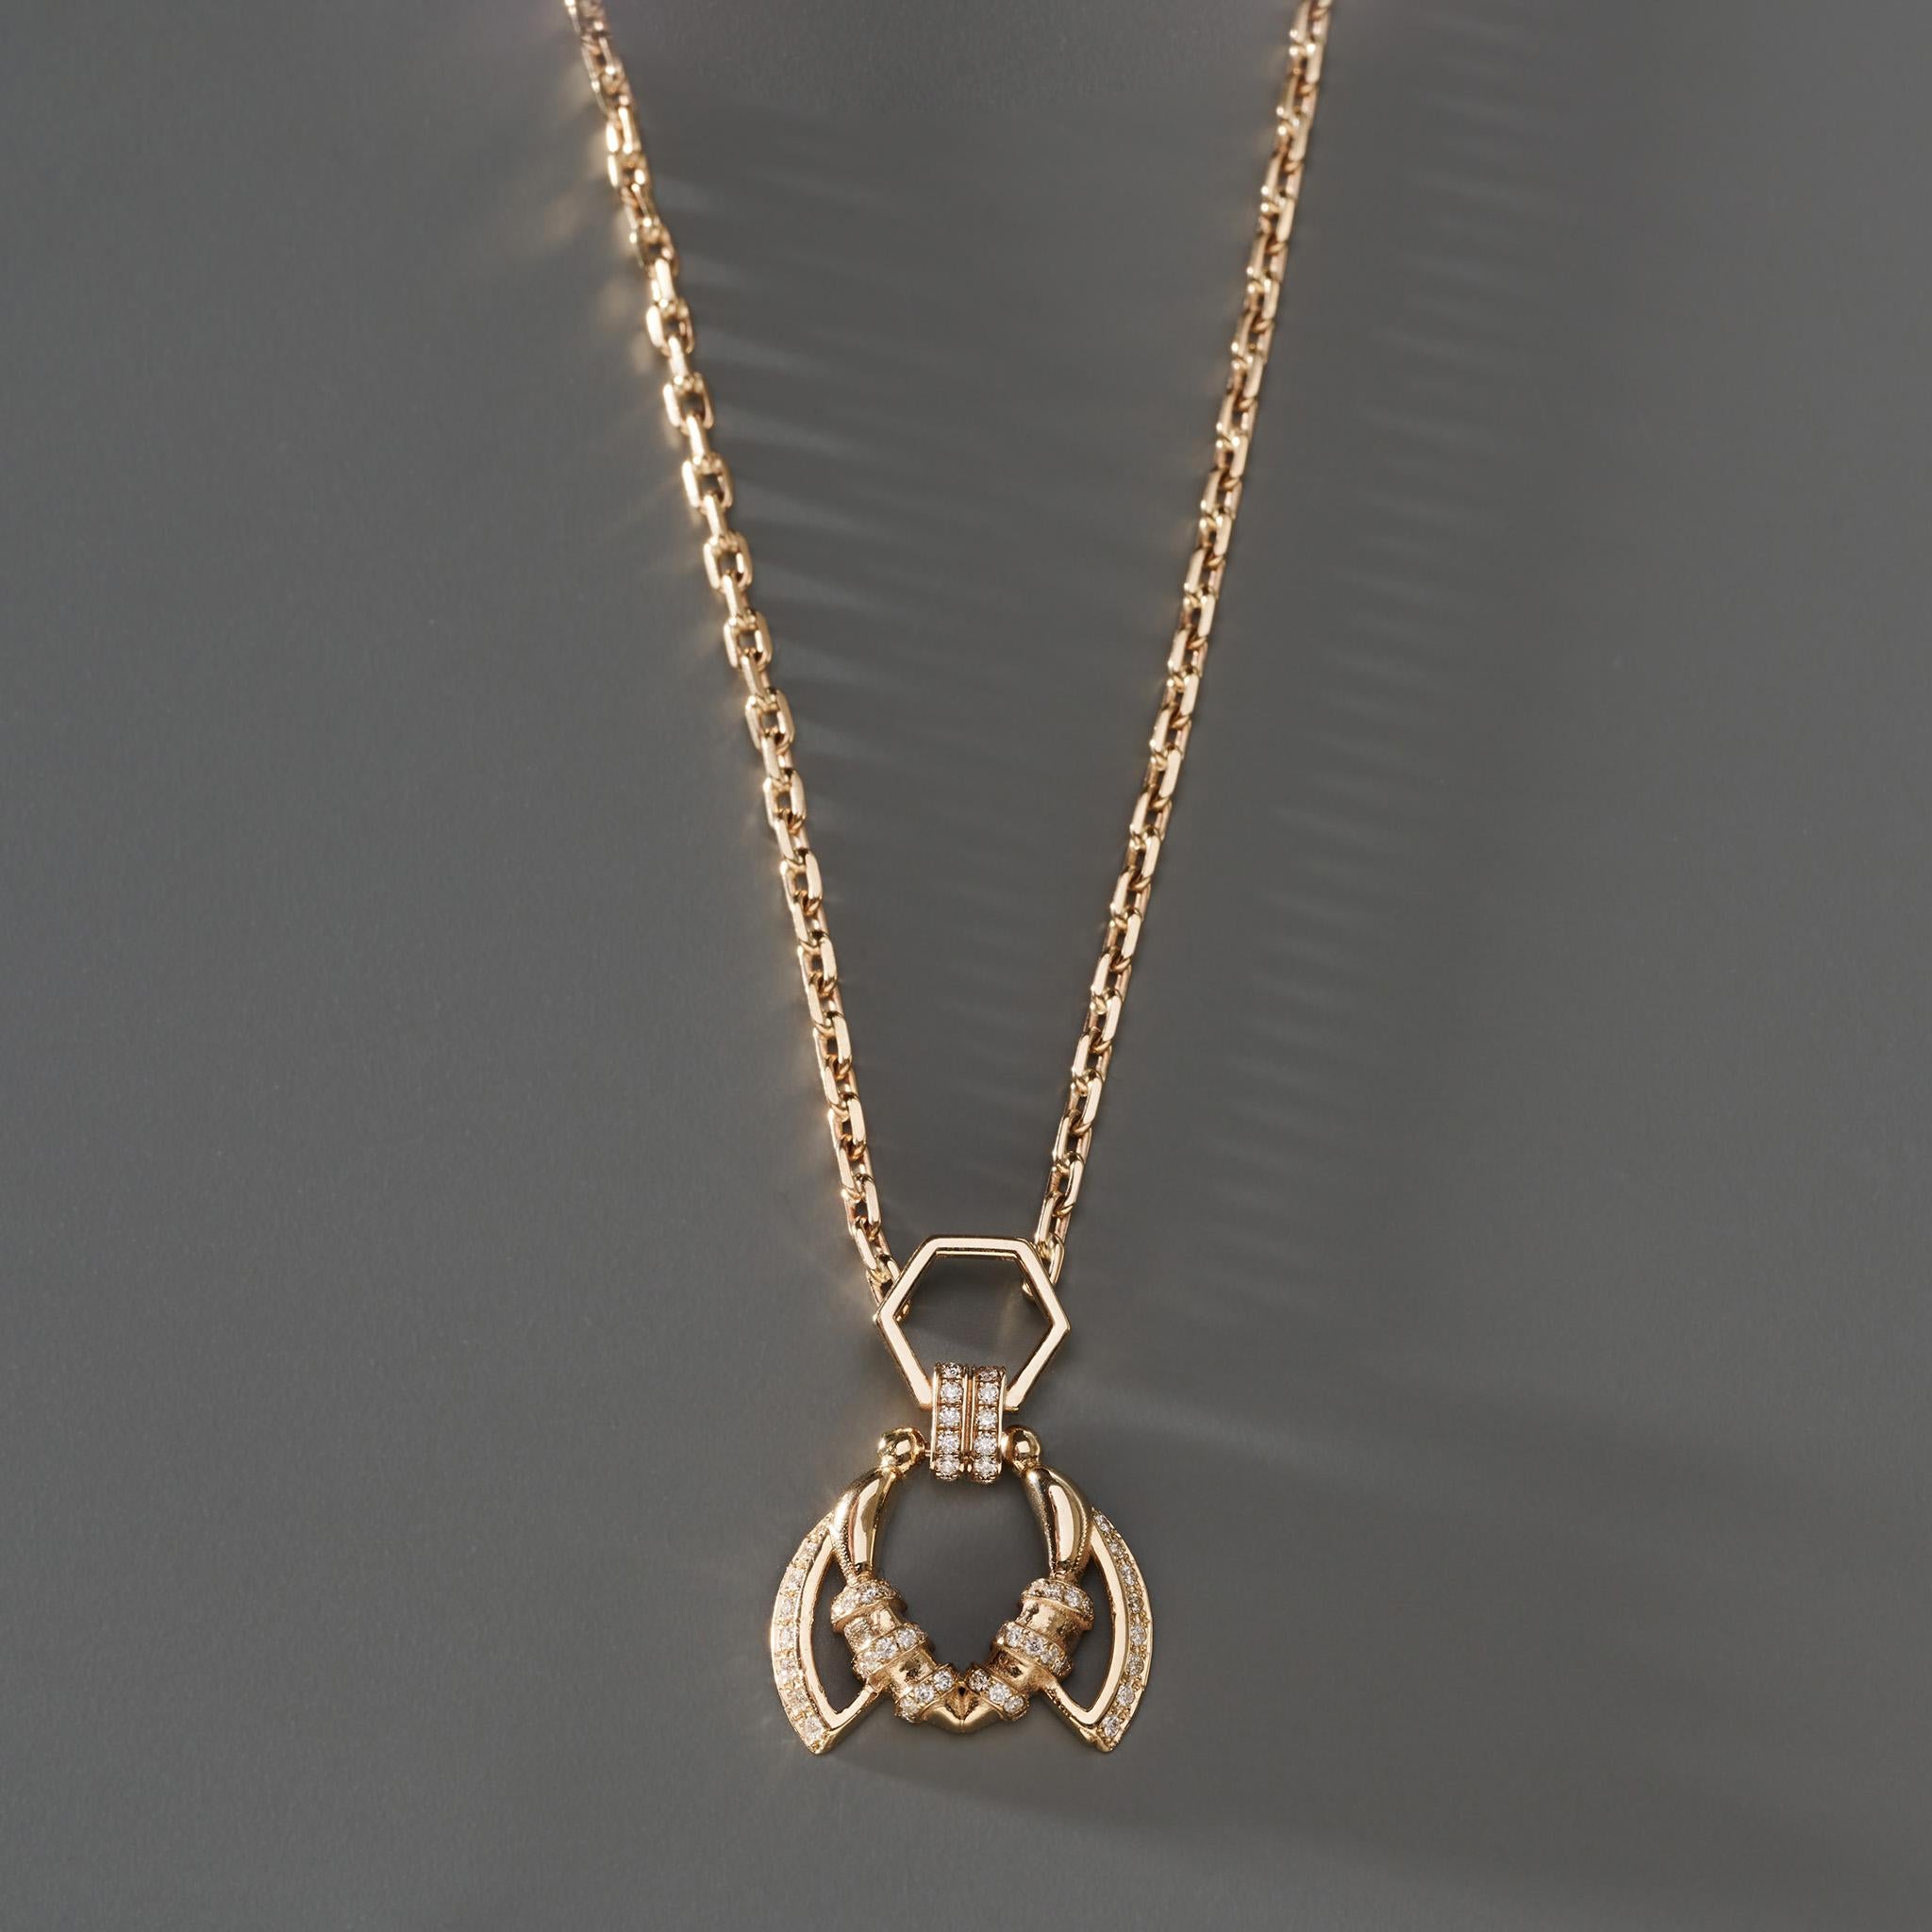 This necklace from POLINA ELLIS' MELISSA collection is handcrafted in 18K raw white gold with 0,26ct white brilliant cut diamonds on a handcrafted 18kt raw white gold chain.
Motif length: 2,20cm Motif width: 1,55cm
Total length: 60cm